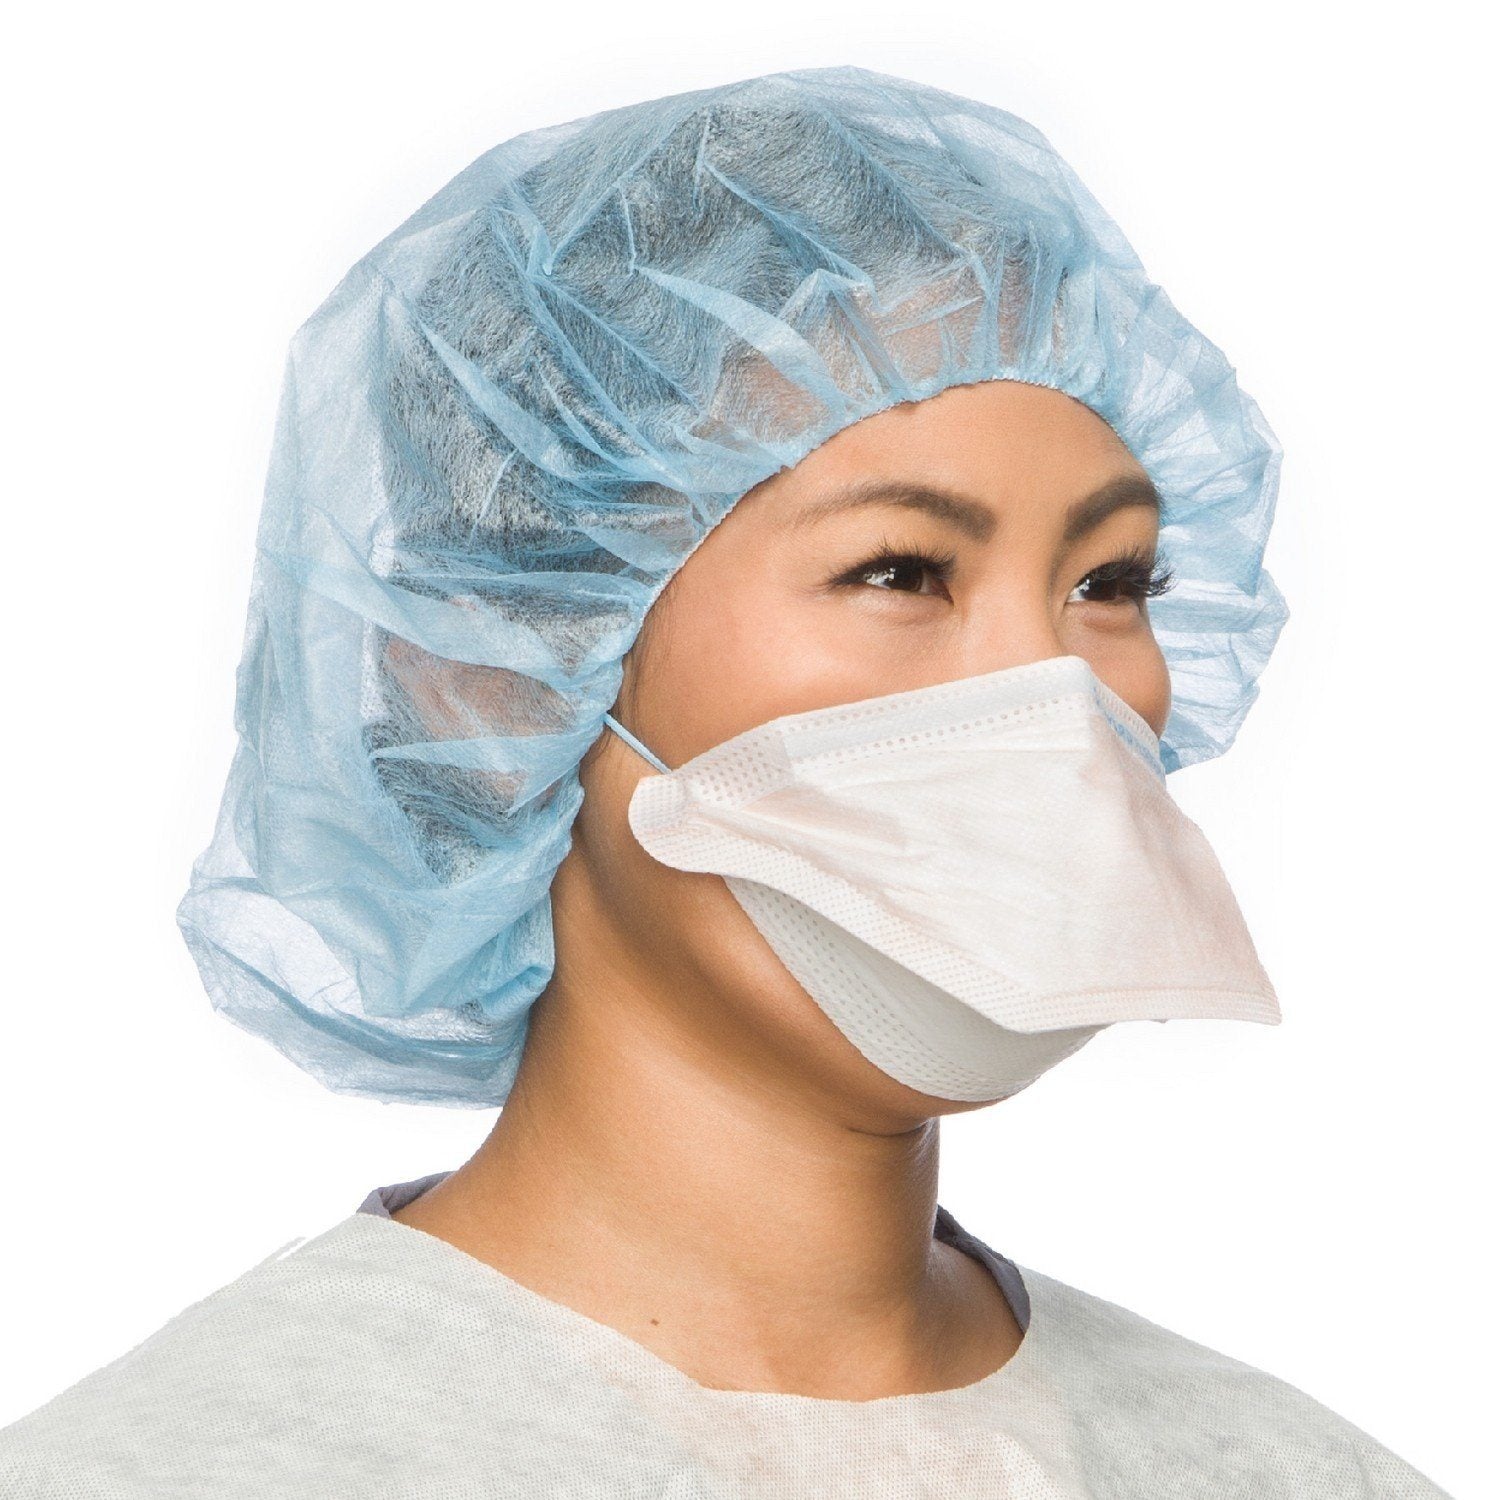 Halyard Model 46727 FLUIDSHIELD Surgical N95 Respirator Mask (35 Per Box) - One Source Medical Supplies